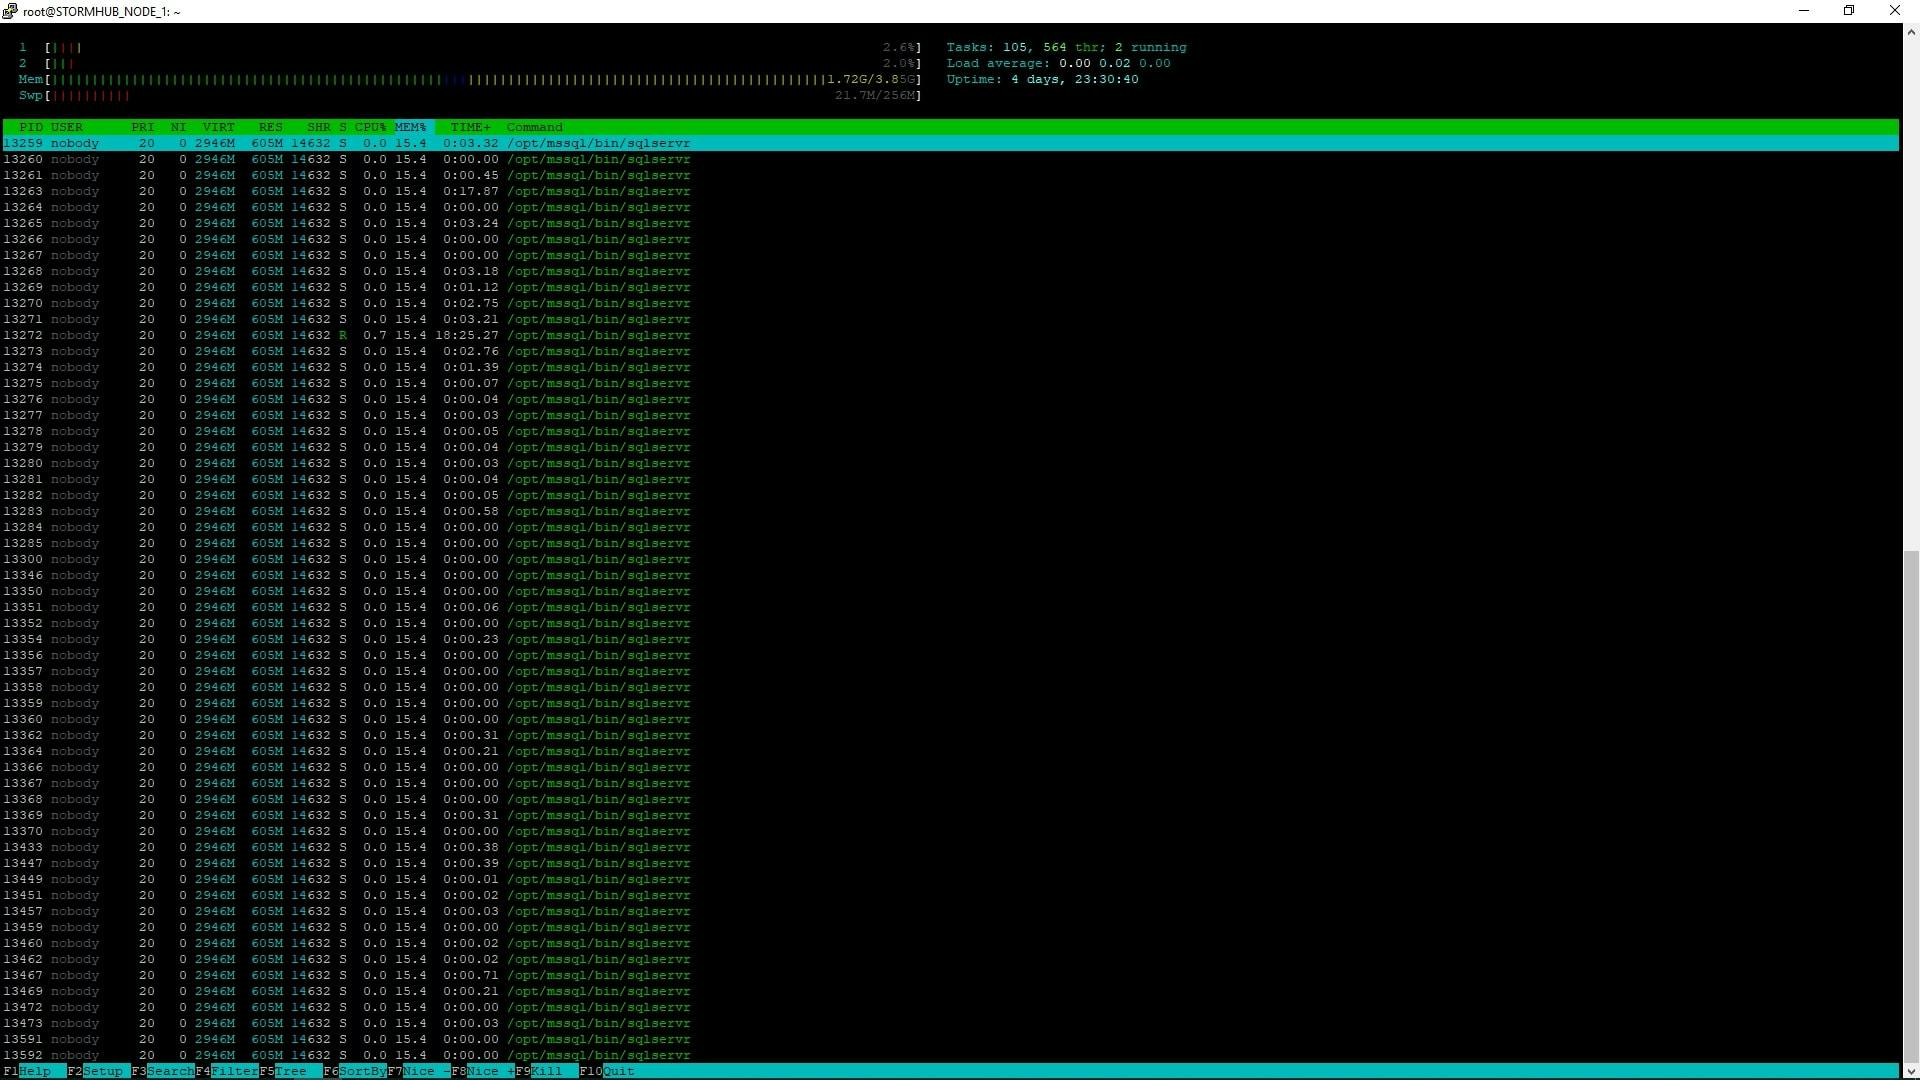 Stormhub "htop" output when fully operational.